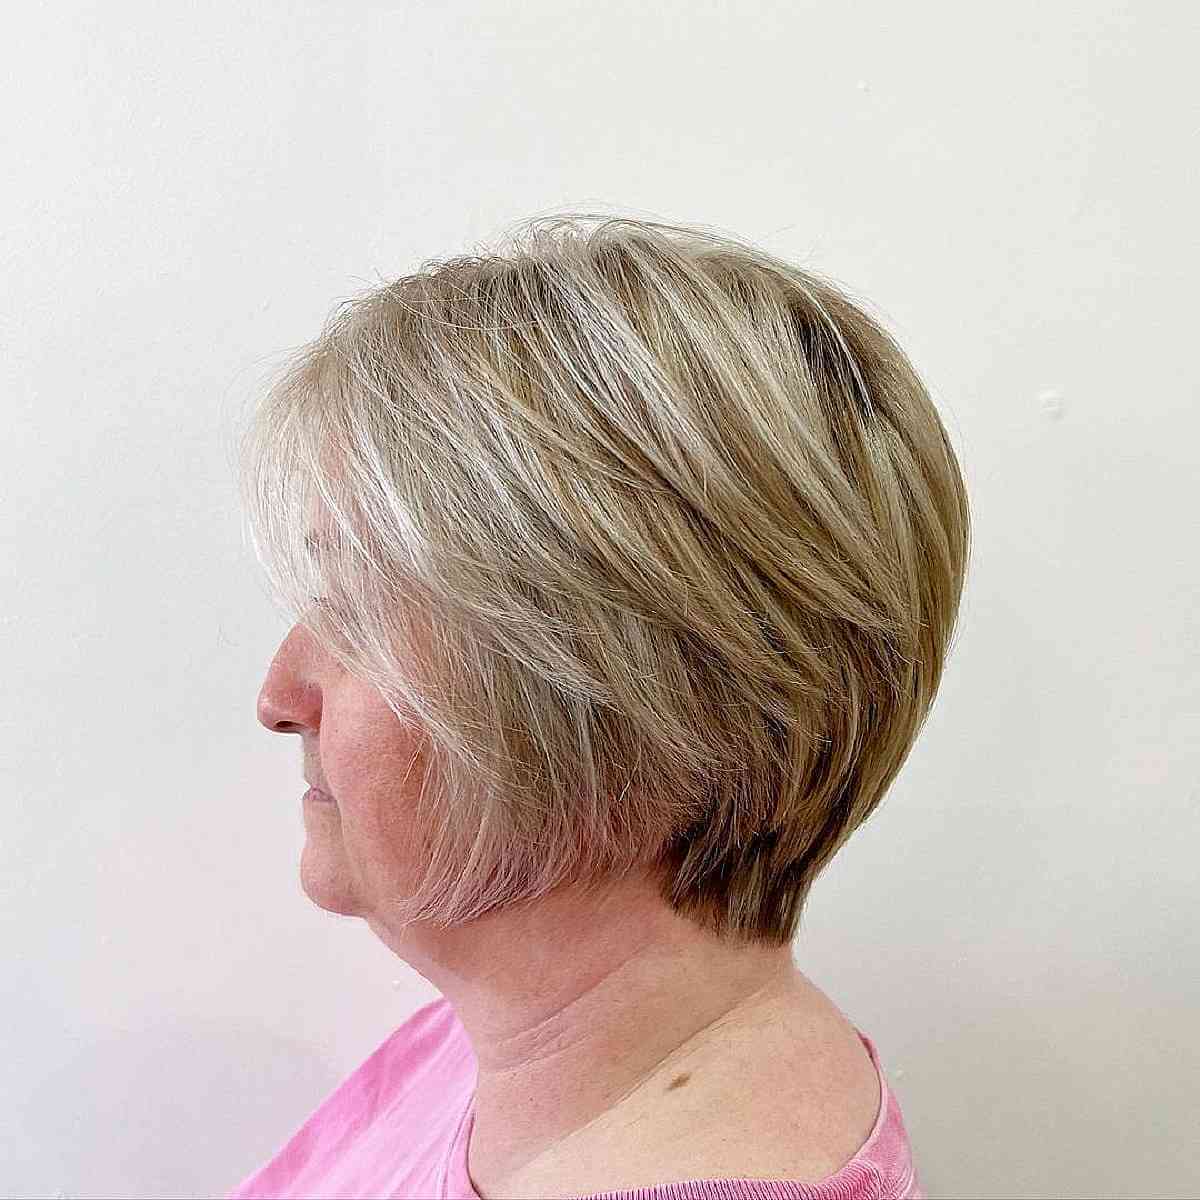 Short Feathered Cut on Women Over 60